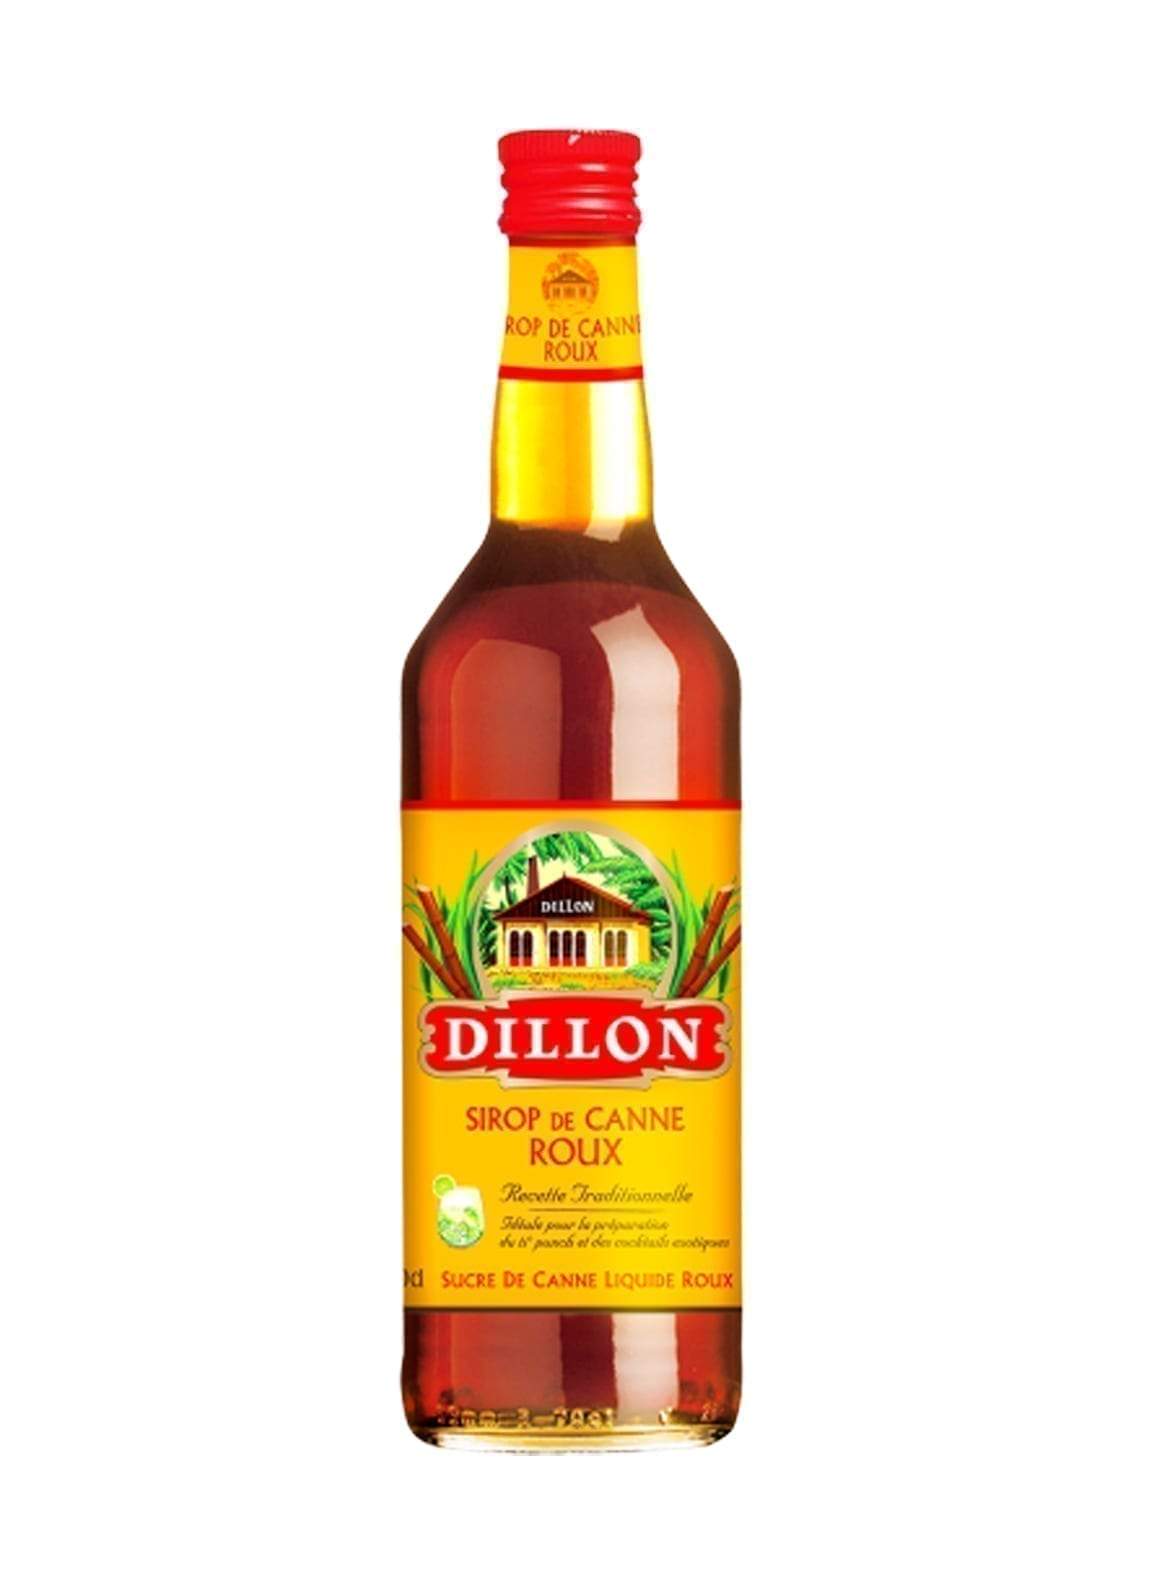 Dillon Sirop de Sucre de Canne Roux (Red sugar cane syrup) 700ml | Rum | Shop online at Spirits of France